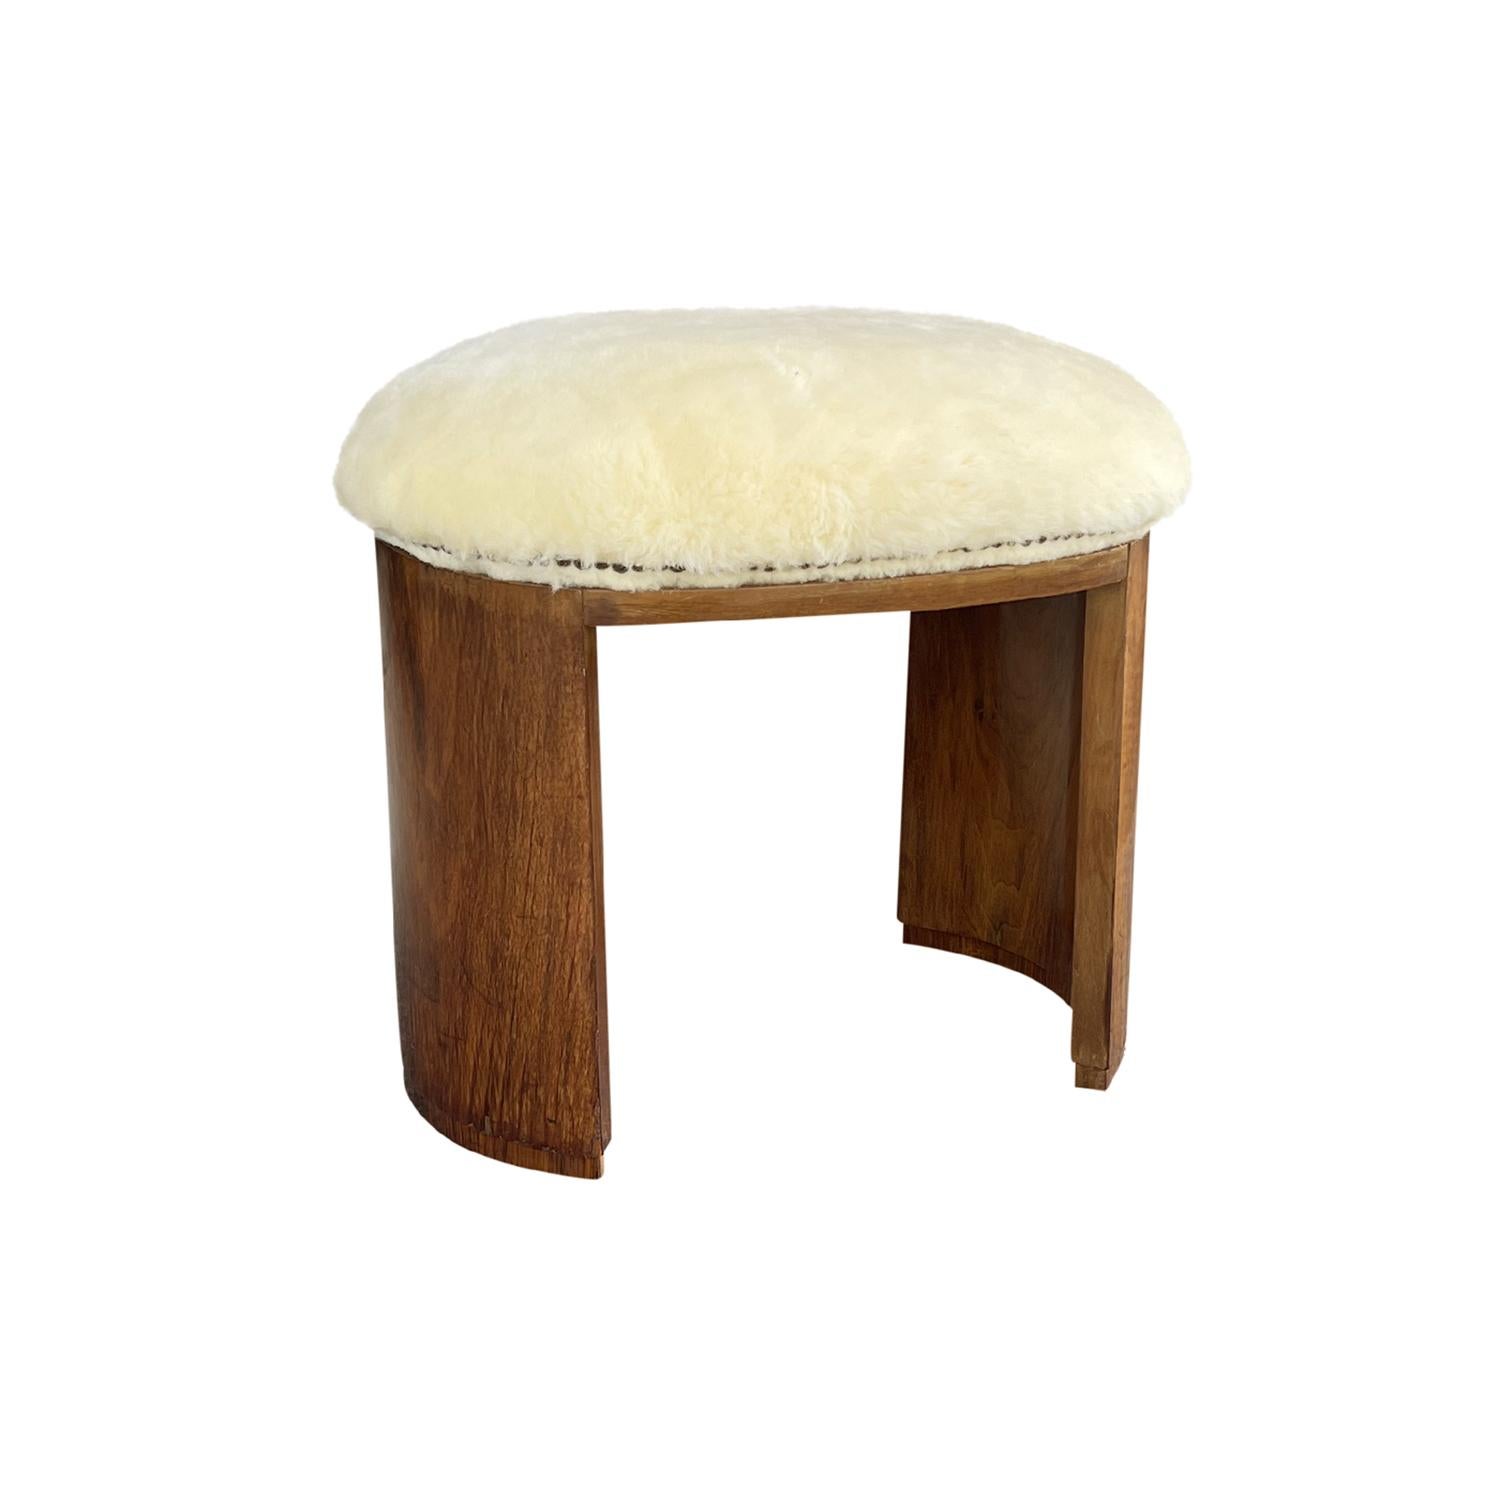 A vintage French Art Deco stool made of hand carved Cherrywood with metal nailheads, in good condition. Newly upholstered in yellow sheepskin. Minor fading due to age. Wear consistent with age and use. Circa 1925, Paris, France.